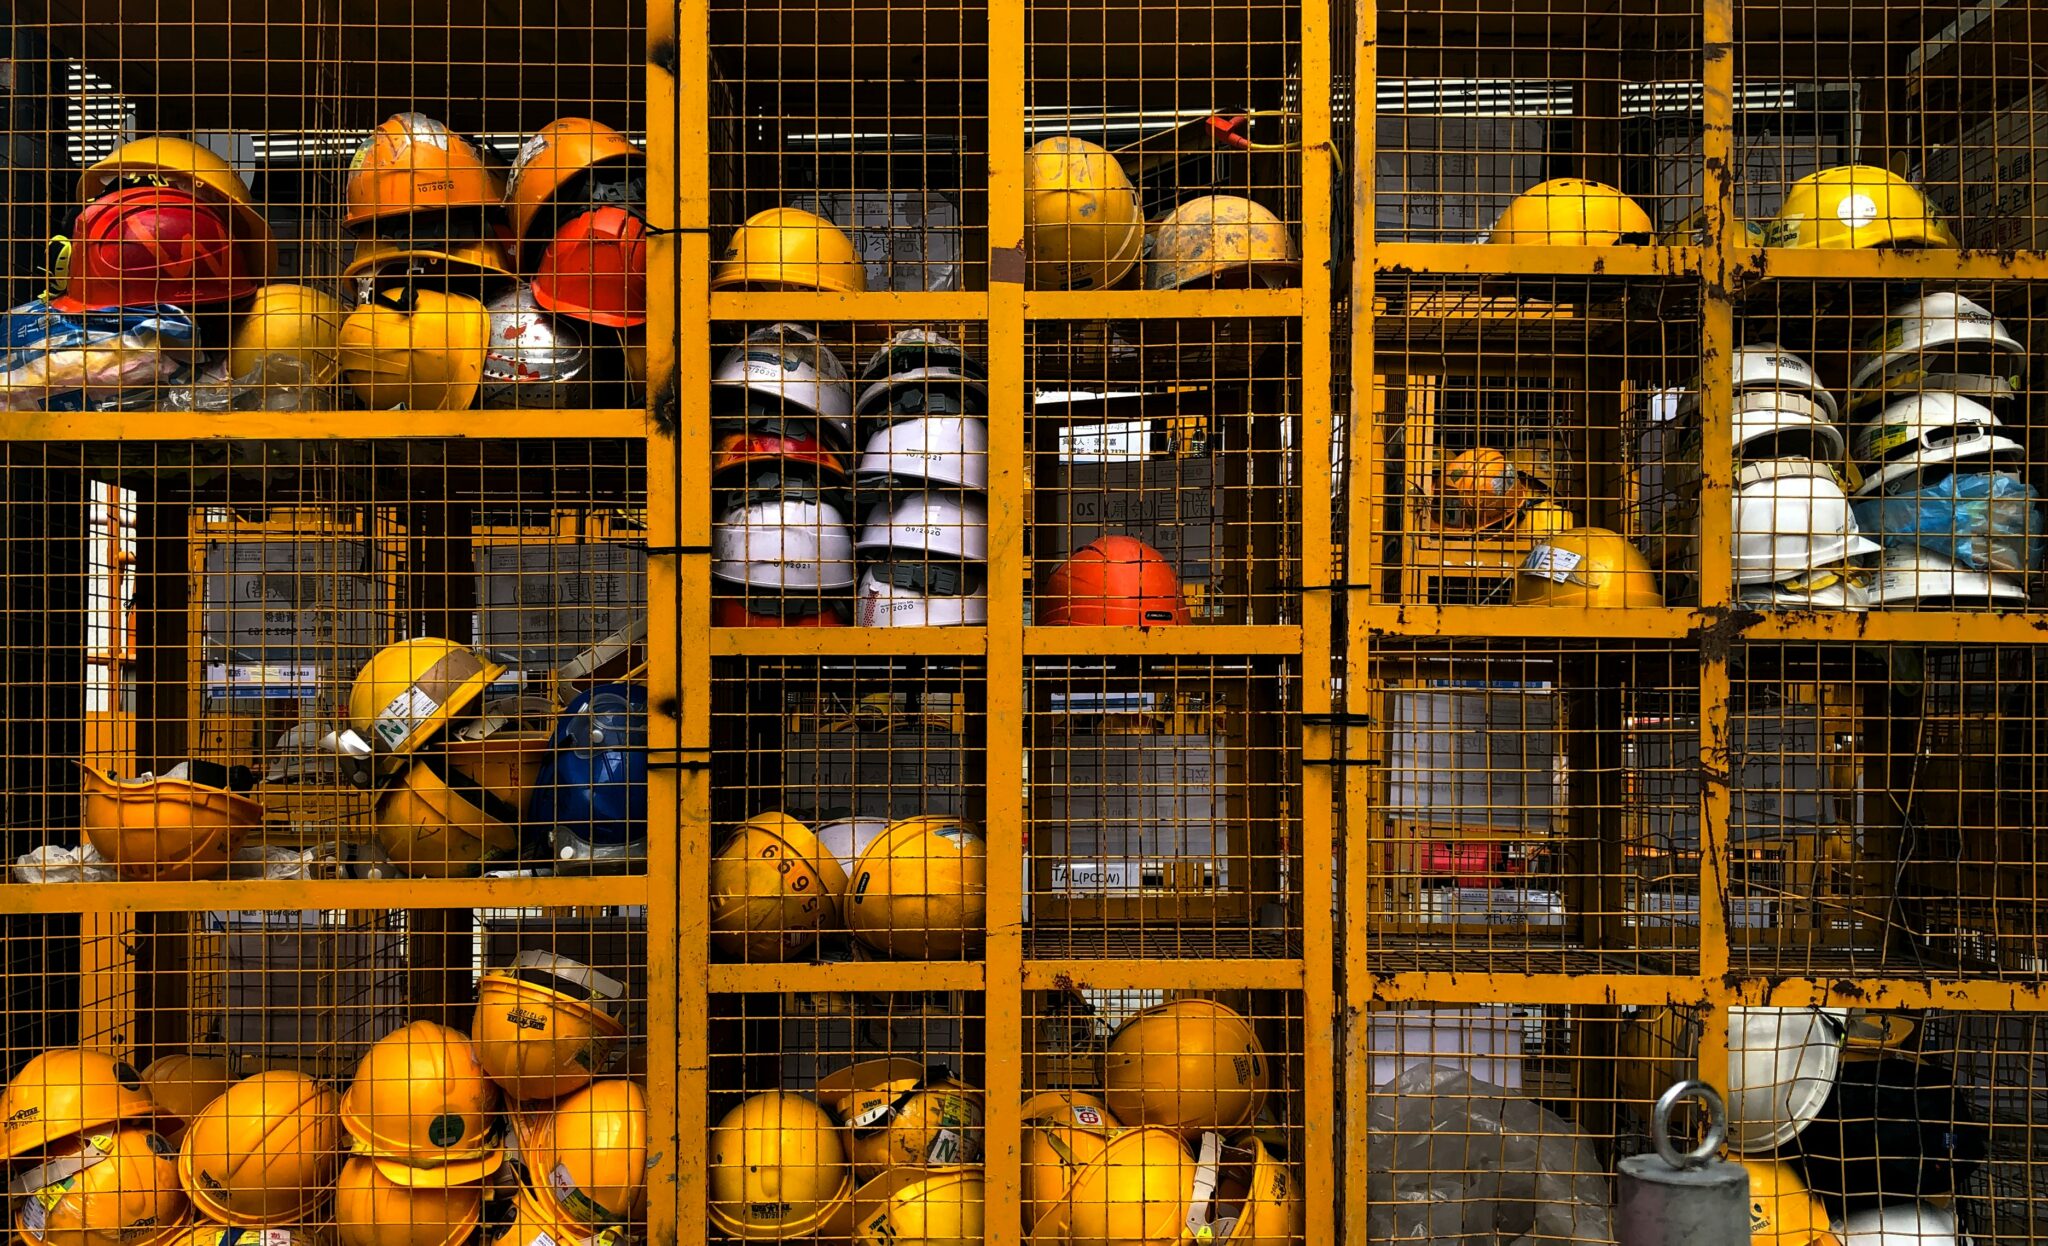 Waste balers and occupational health and safety: ensuring a safe workplace